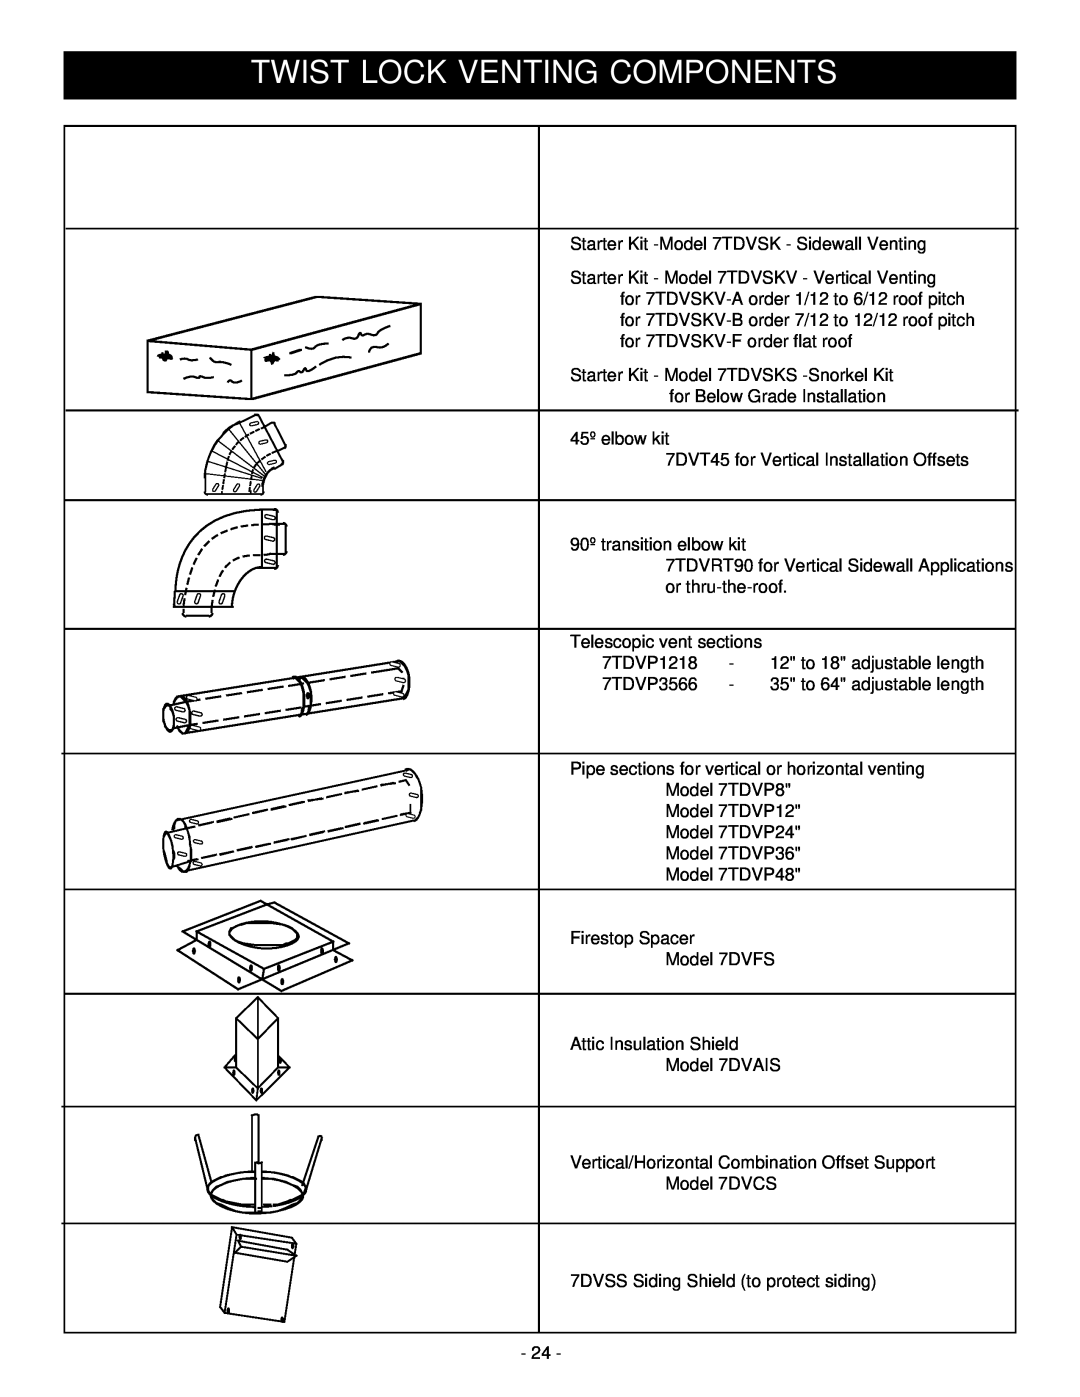 Vermont Casting BHDT36 installation instructions Twist Lock Venting Components 